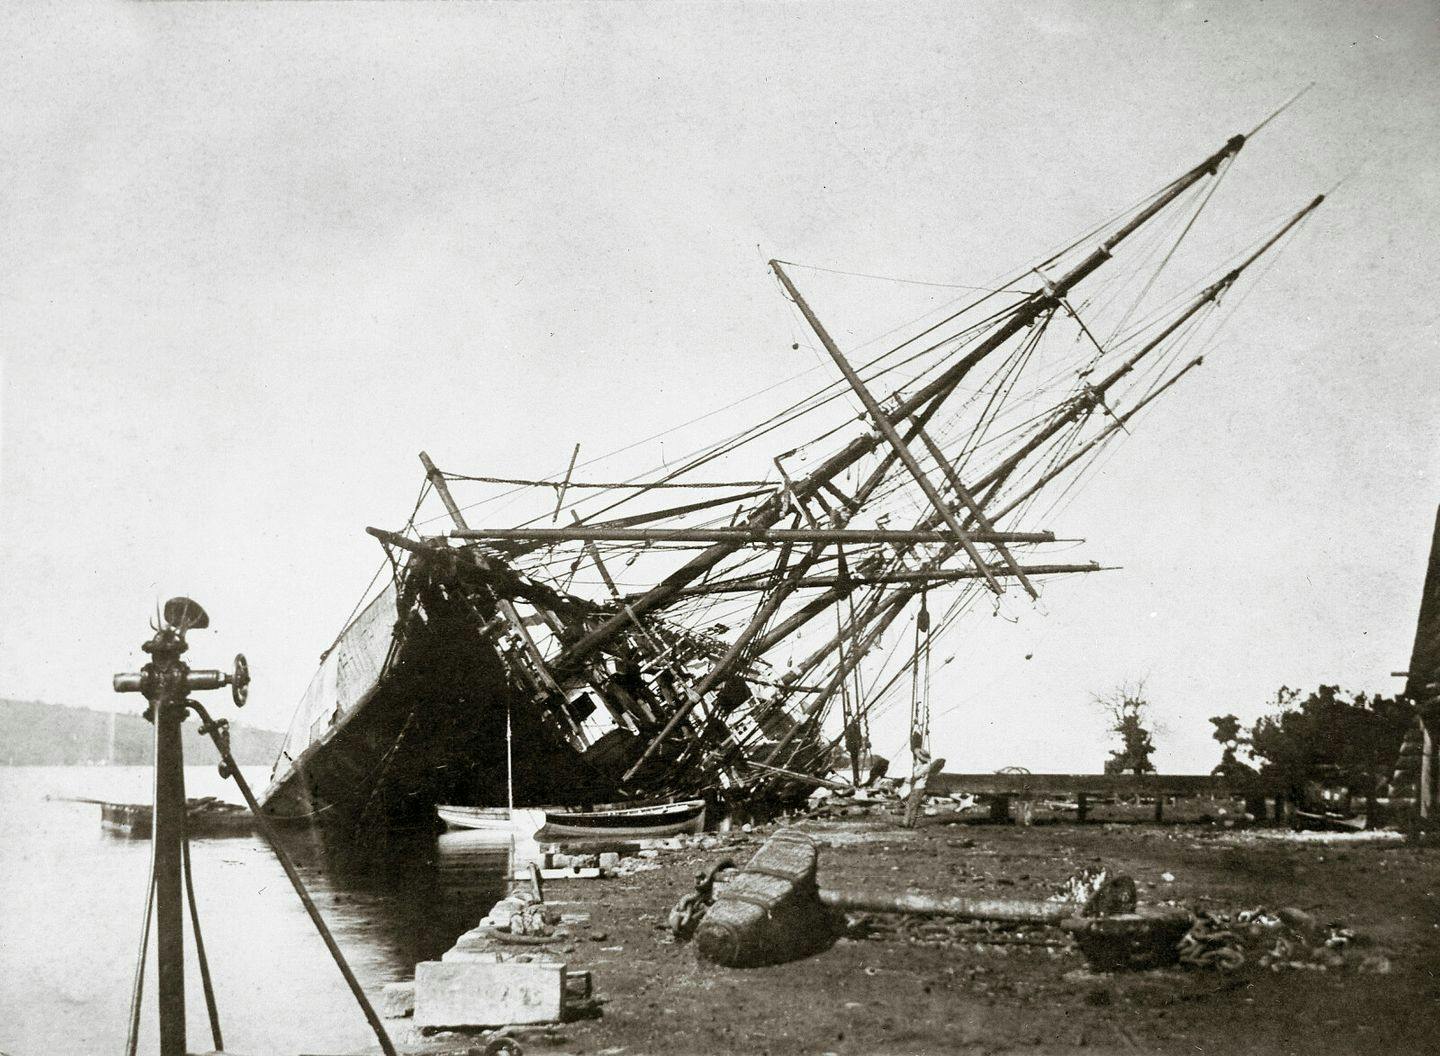 Gyda being repaired on Tahiti. Photo: Aust-Agder museum